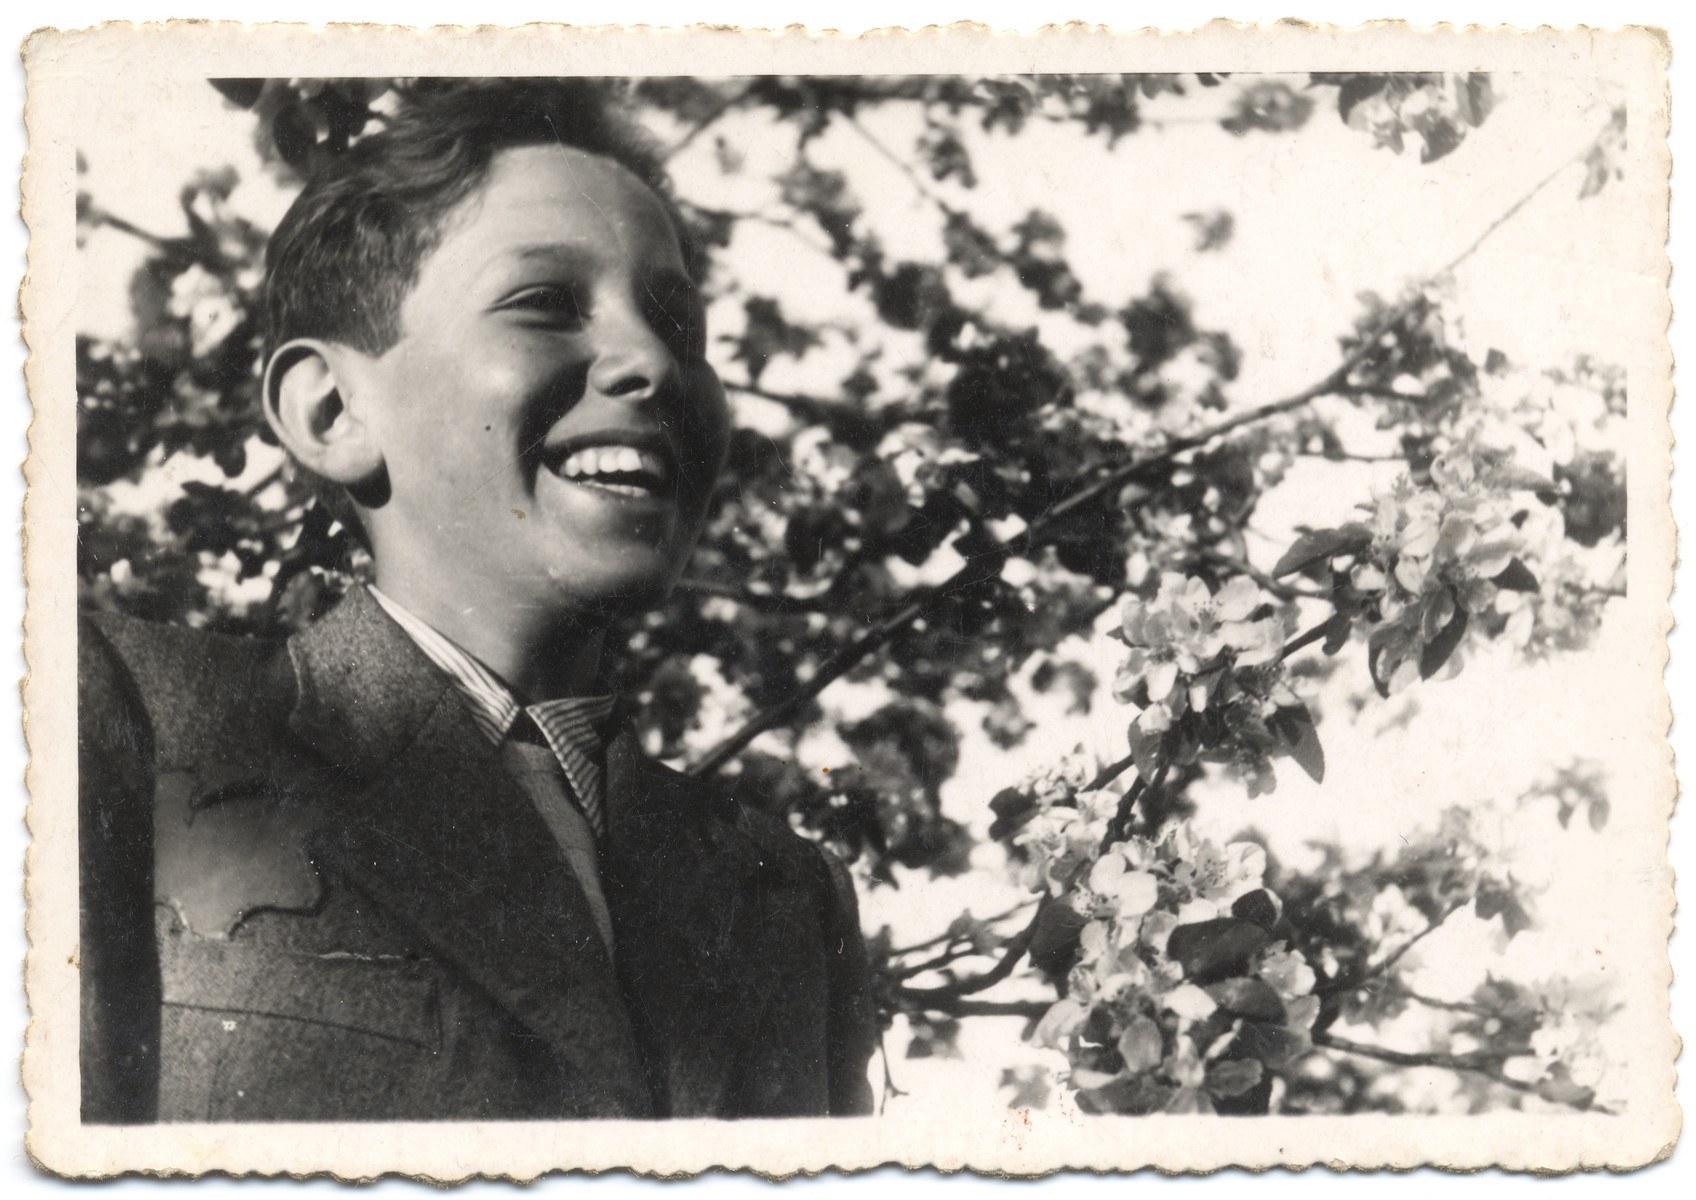 Portrait of a young Jewish teenager in the Lodz ghetto.

Pictured is Menek Fajtlowicz, the cousin of the donor.